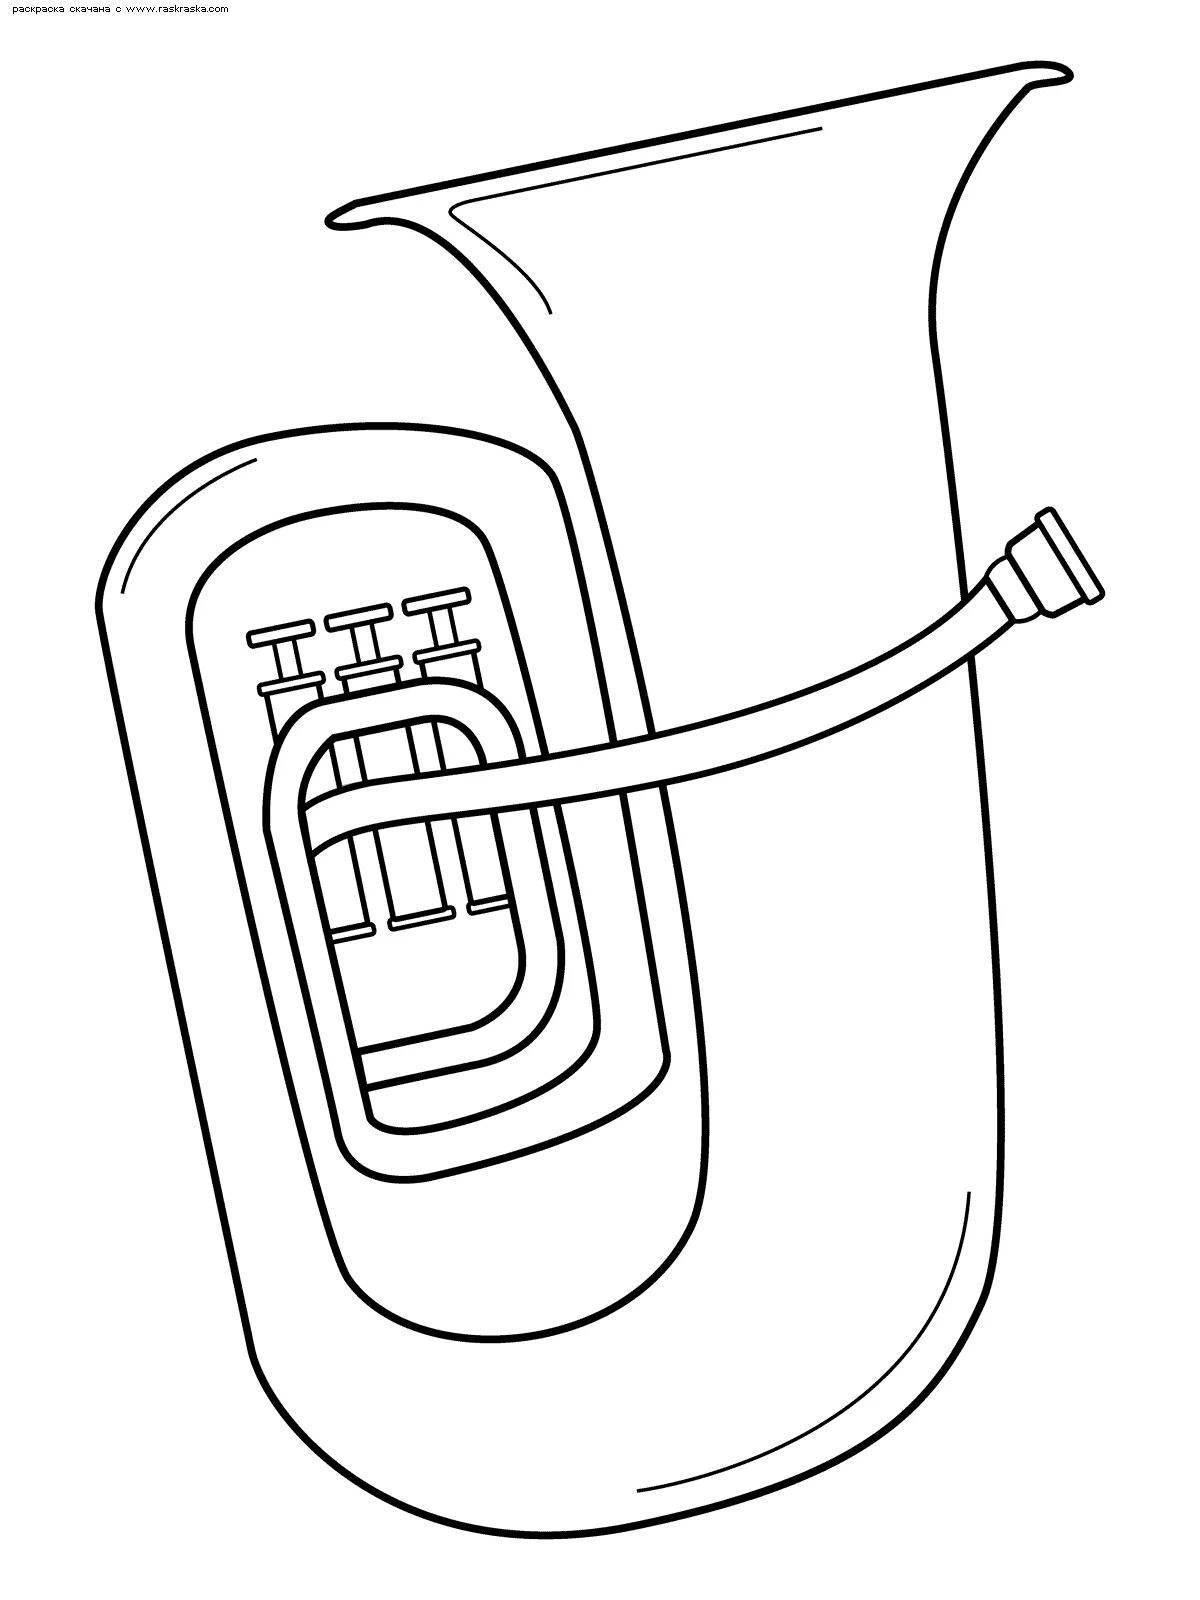 Excellent trumpet coloring page for beginners